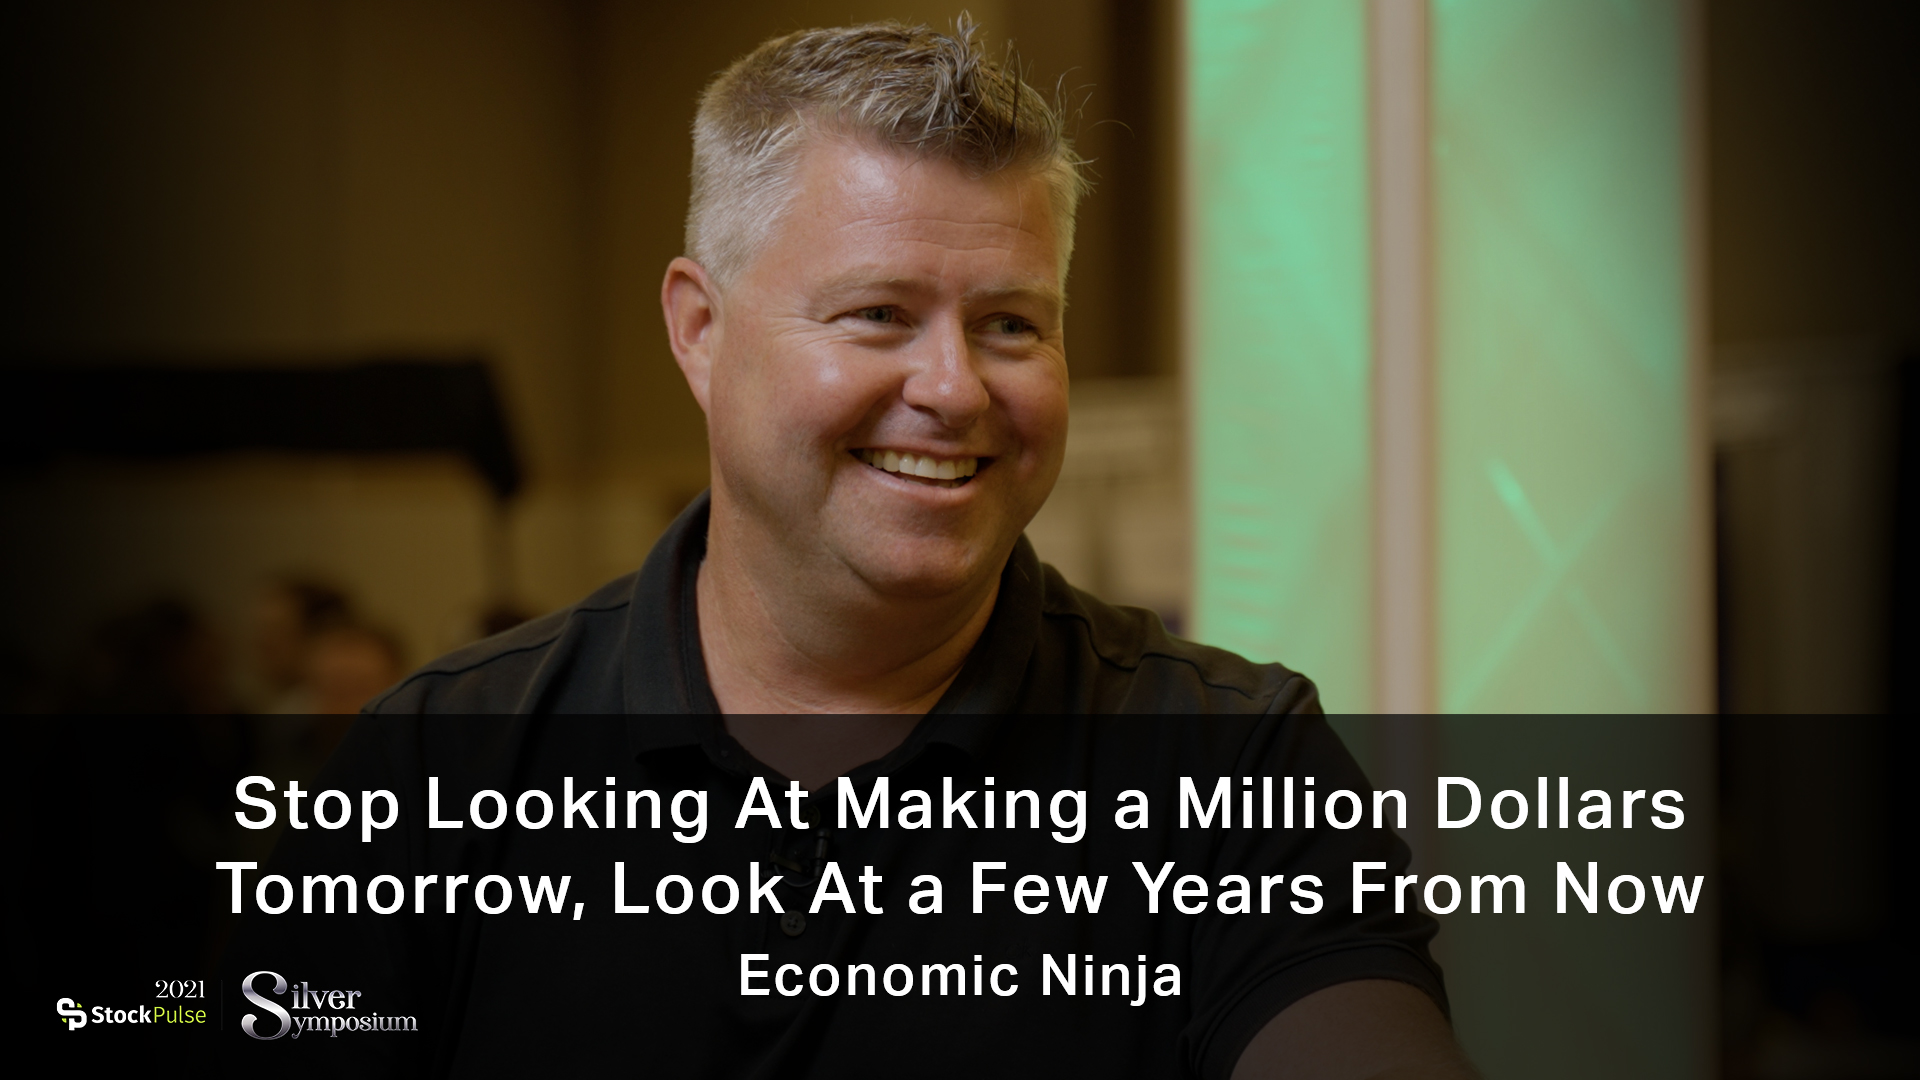 Economic Ninja: Stop Looking At Making a Million Dollars Tomorrow, Look At Making a Million Dollars a Few Years From Now